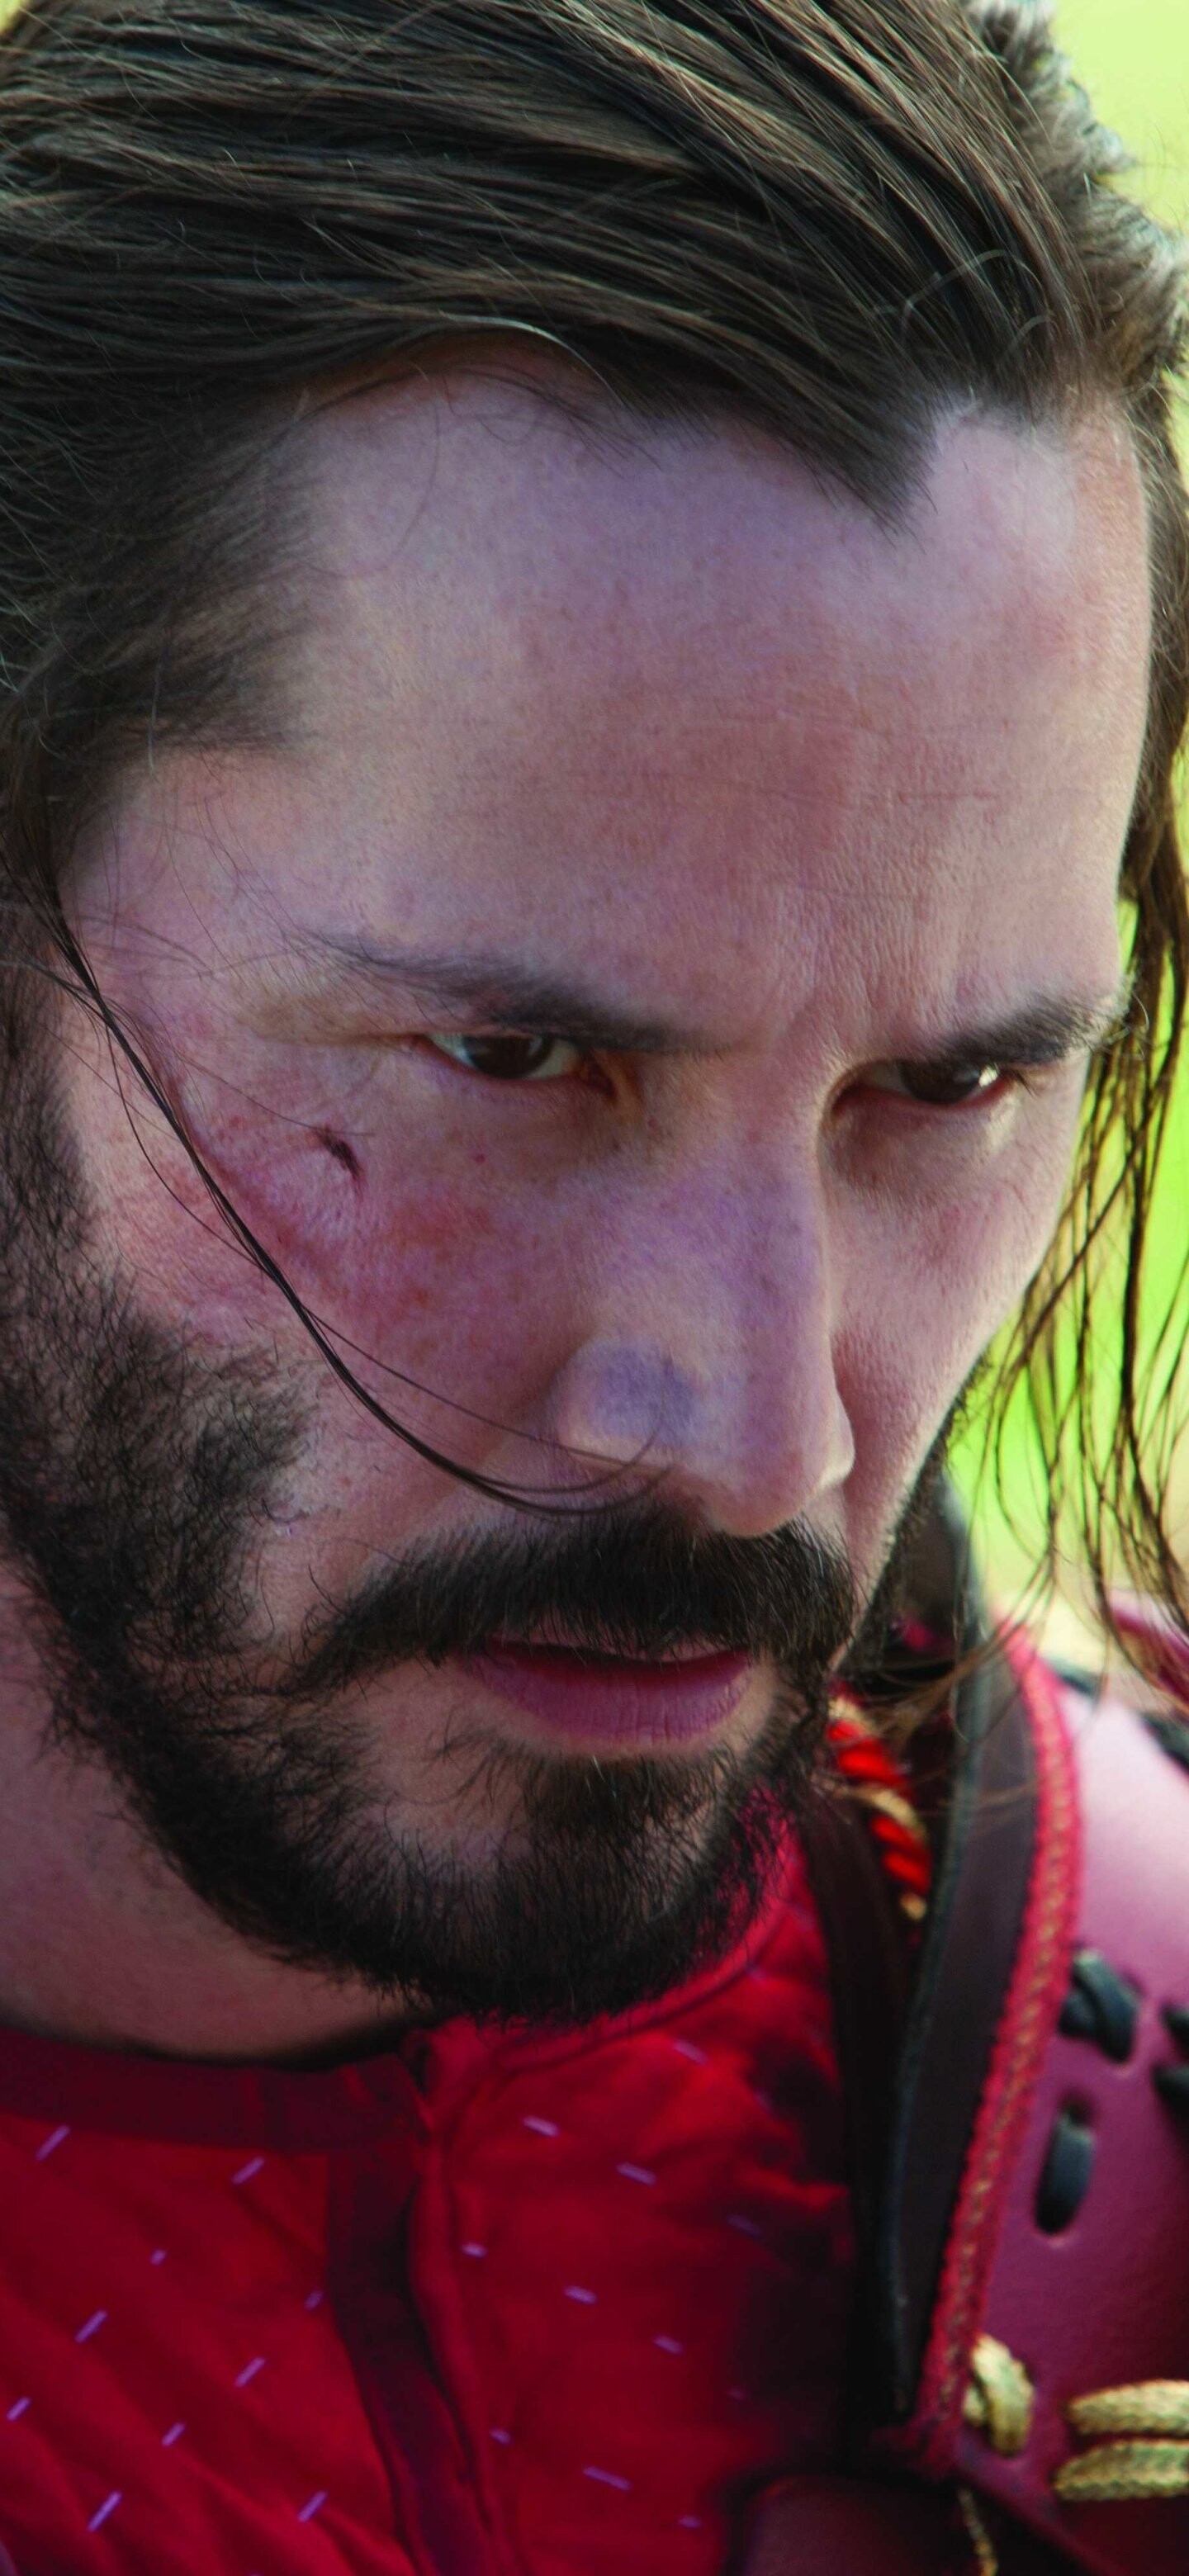 47 Ronin: Starring Keanu Reeves, The title role, A work of Chushingura, The Treasury of Loyal Retainers. 1440x3120 HD Wallpaper.